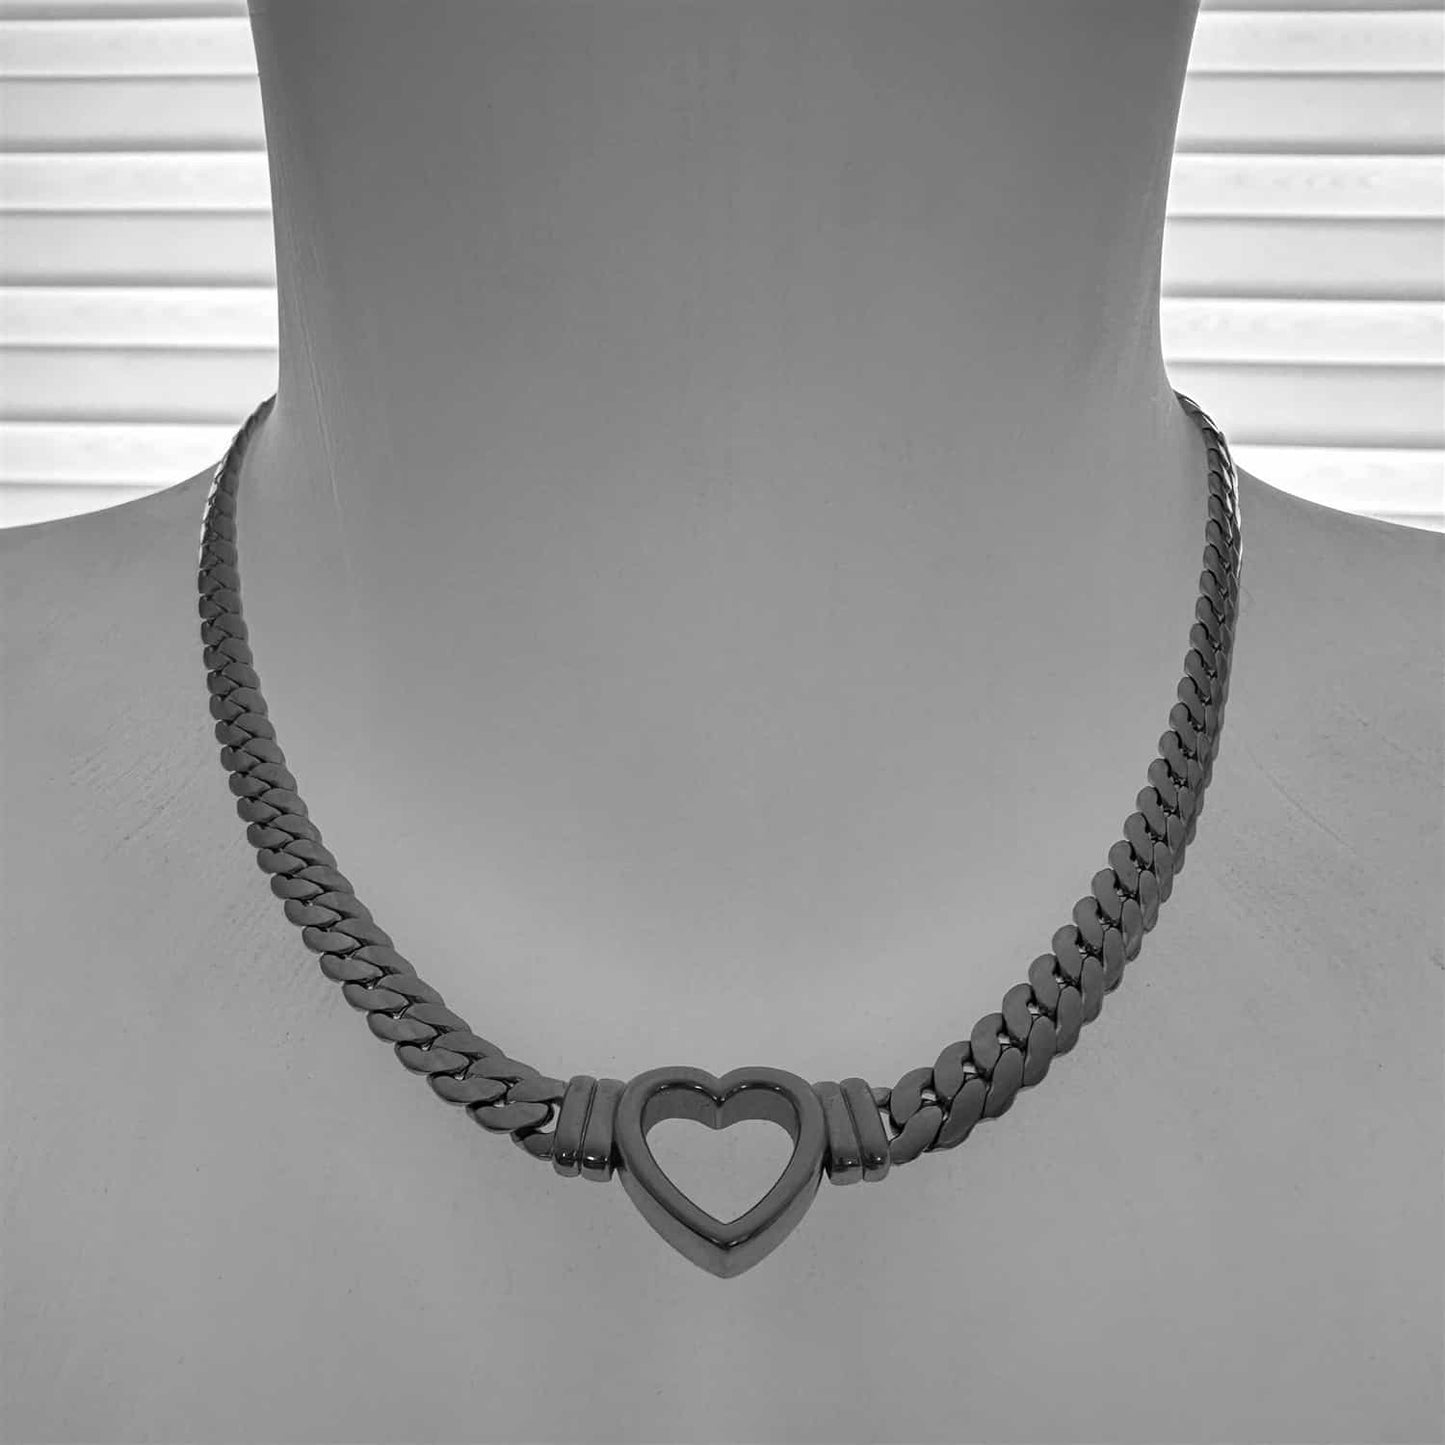 Bellatrix Cuban Chain Necklace with Heart